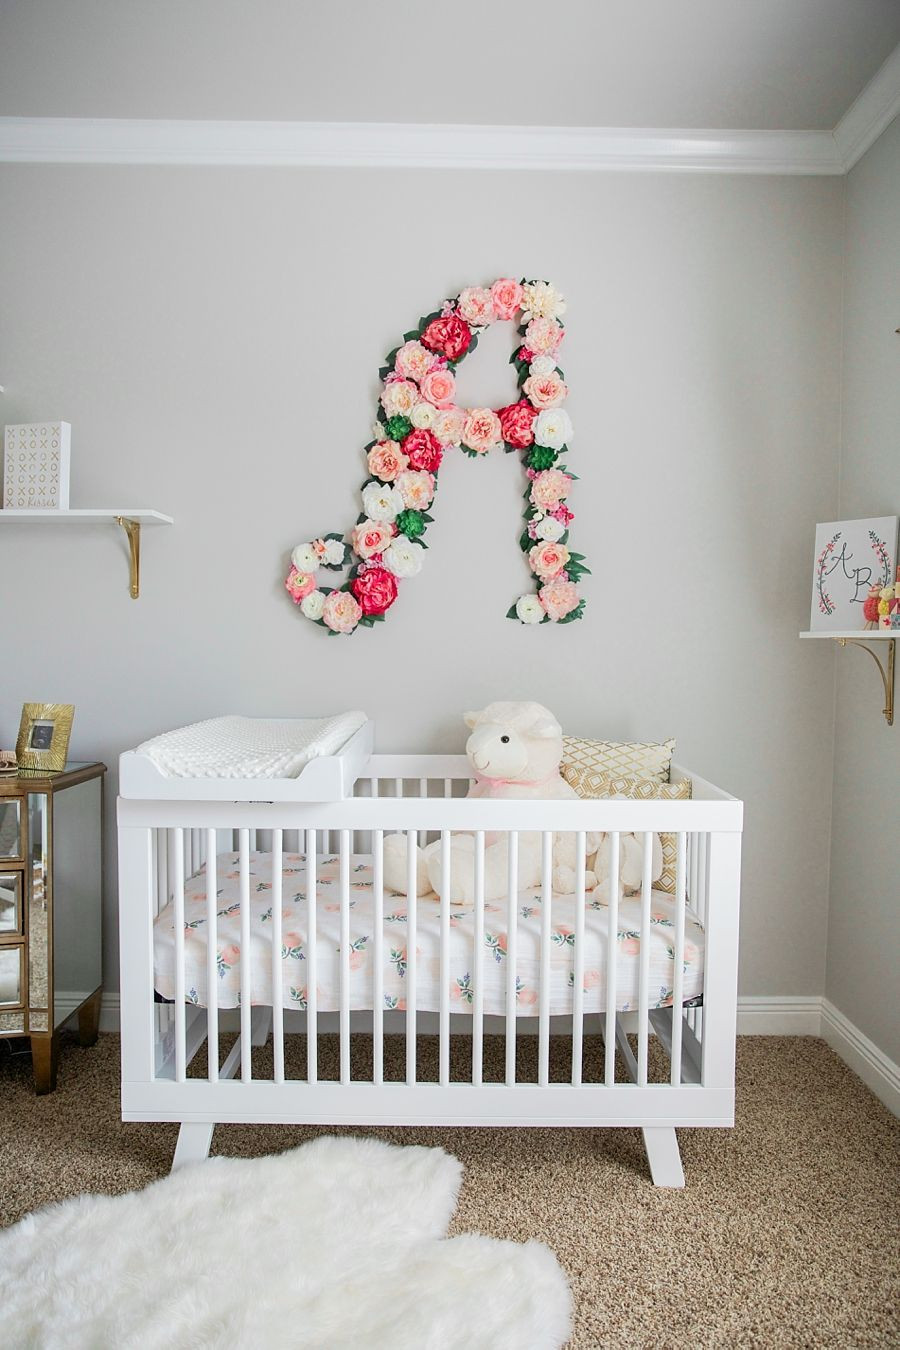 Baby Girl Wall Decorating Ideas
 Baby girl nursery with floral wall